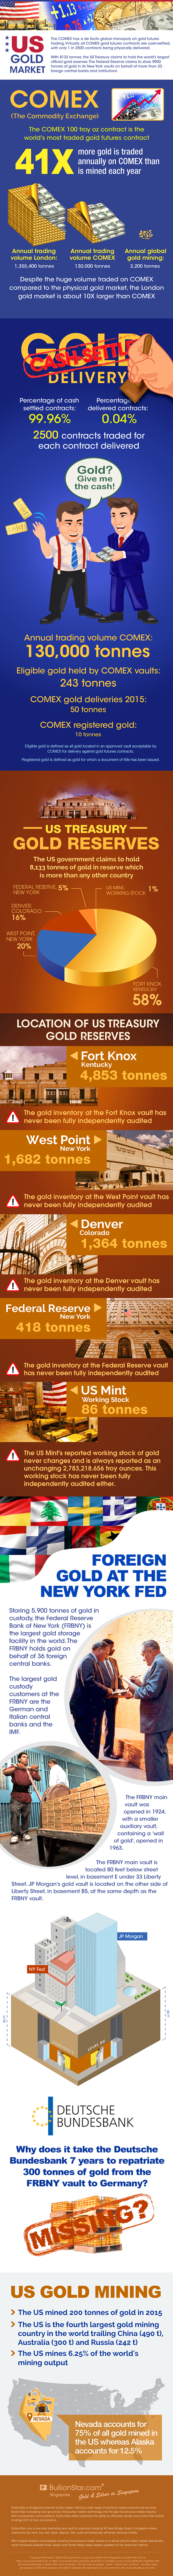 The US Gold Market